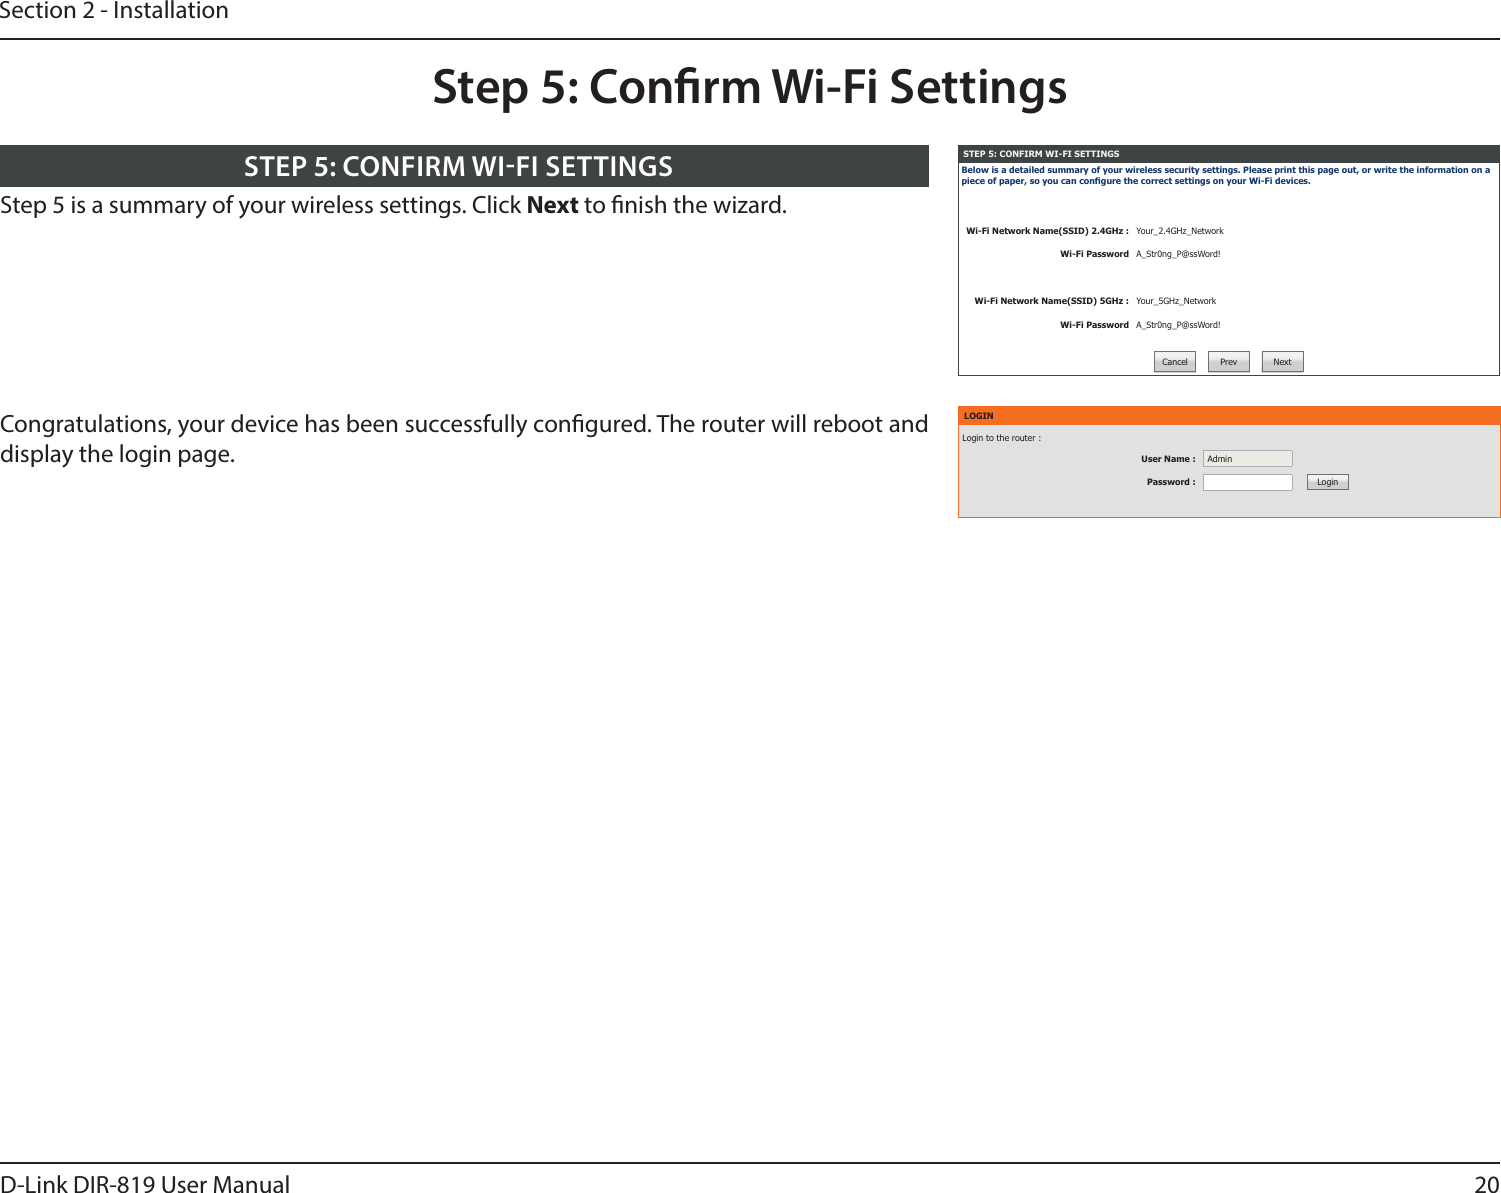 20D-Link DIR-819 User ManualSection 2 - InstallationStep 5: Conrm Wi-Fi SettingsSTEP 5: CONFIRM WI-FI SETTINGSBelow is a detailed summary of your wireless security settings. Please print this page out, or write the information on a piece of paper, so you can congure the correct settings on your Wi-Fi devices.Wi-Fi Network Name(SSID) 2.4GHz : Your_2.4GHz_NetworkWi-Fi Password A_Str0ng_P@ssWord!Wi-Fi Network Name(SSID) 5GHz : Your_5GHz_NetworkWi-Fi Password A_Str0ng_P@ssWord!Cancel Prev NextStep 5 is a summary of your wireless settings. Click Next to nish the wizard. STEP 5: CONFIRM WIFI SETTINGSLOGINLogin to the router :User Name : AdminPassword : LoginCongratulations, your device has been successfully congured. The router will reboot and display the login page.